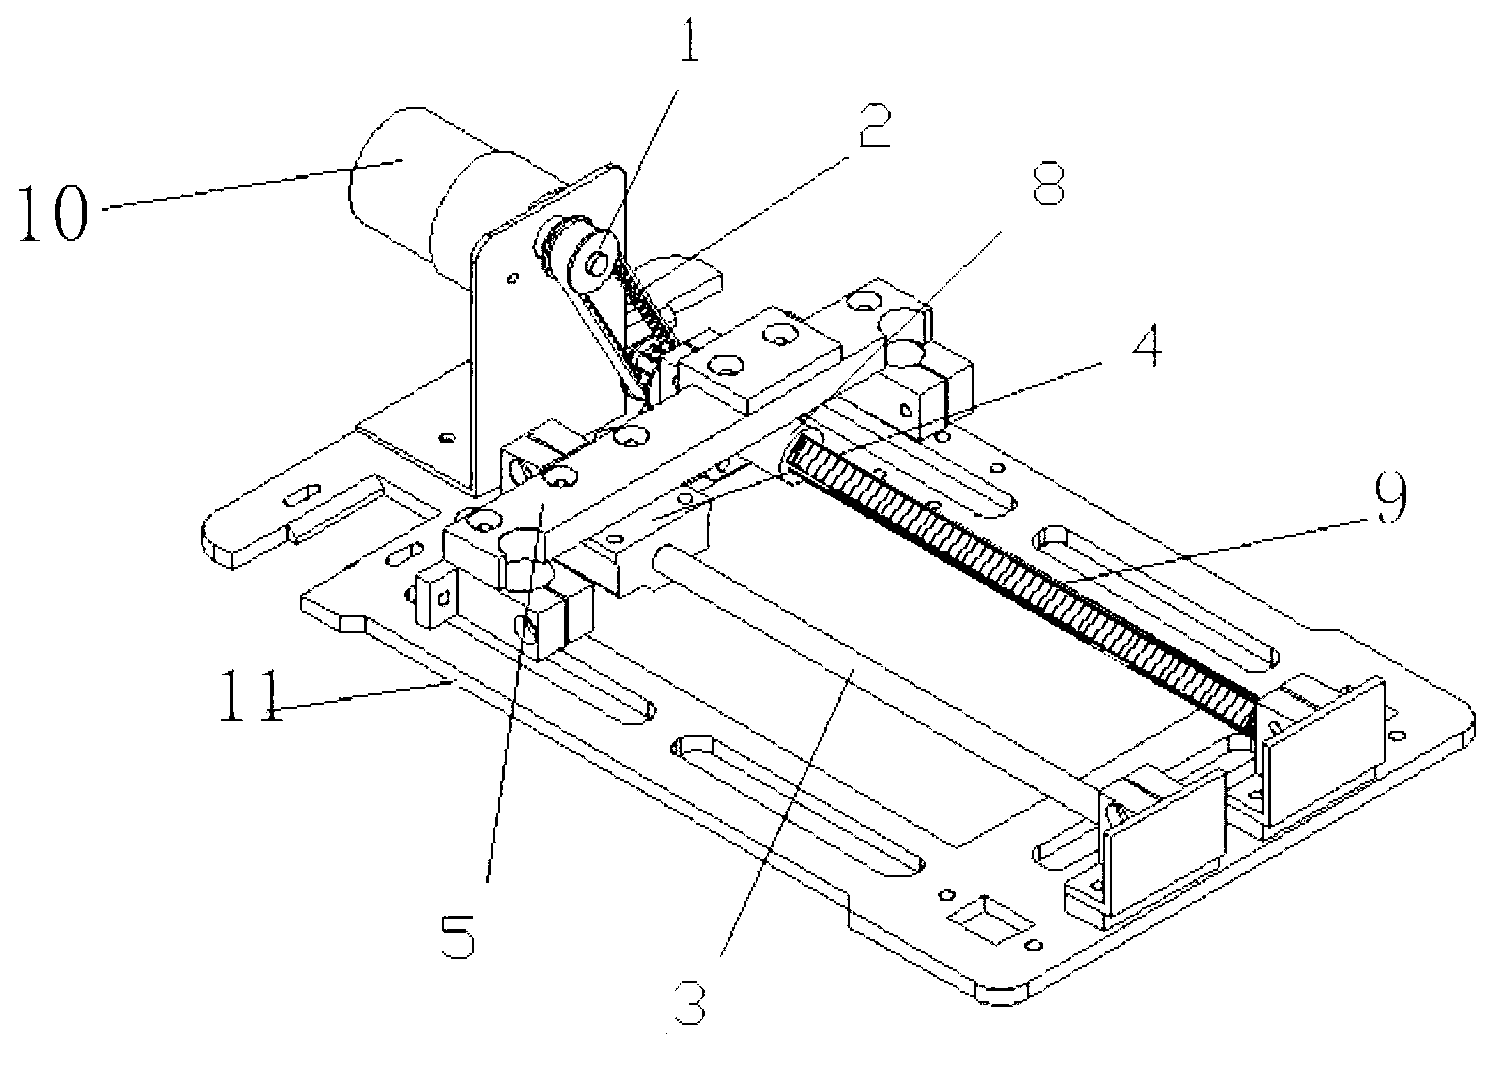 Mechanical carrying device